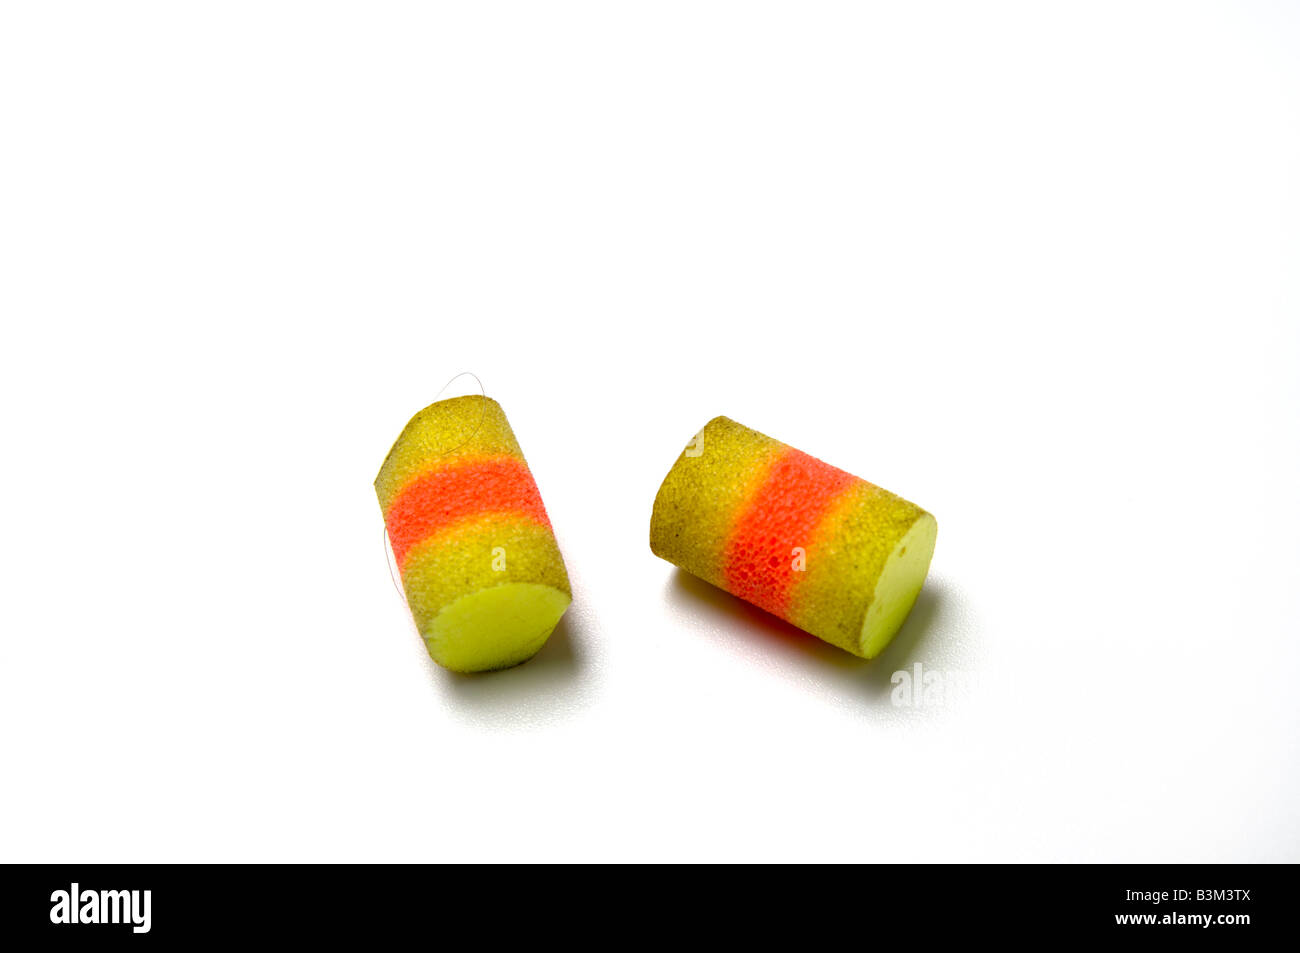 A pair of used yellow earplugs used to reduce noise including noise caused by snoring Stock Photo